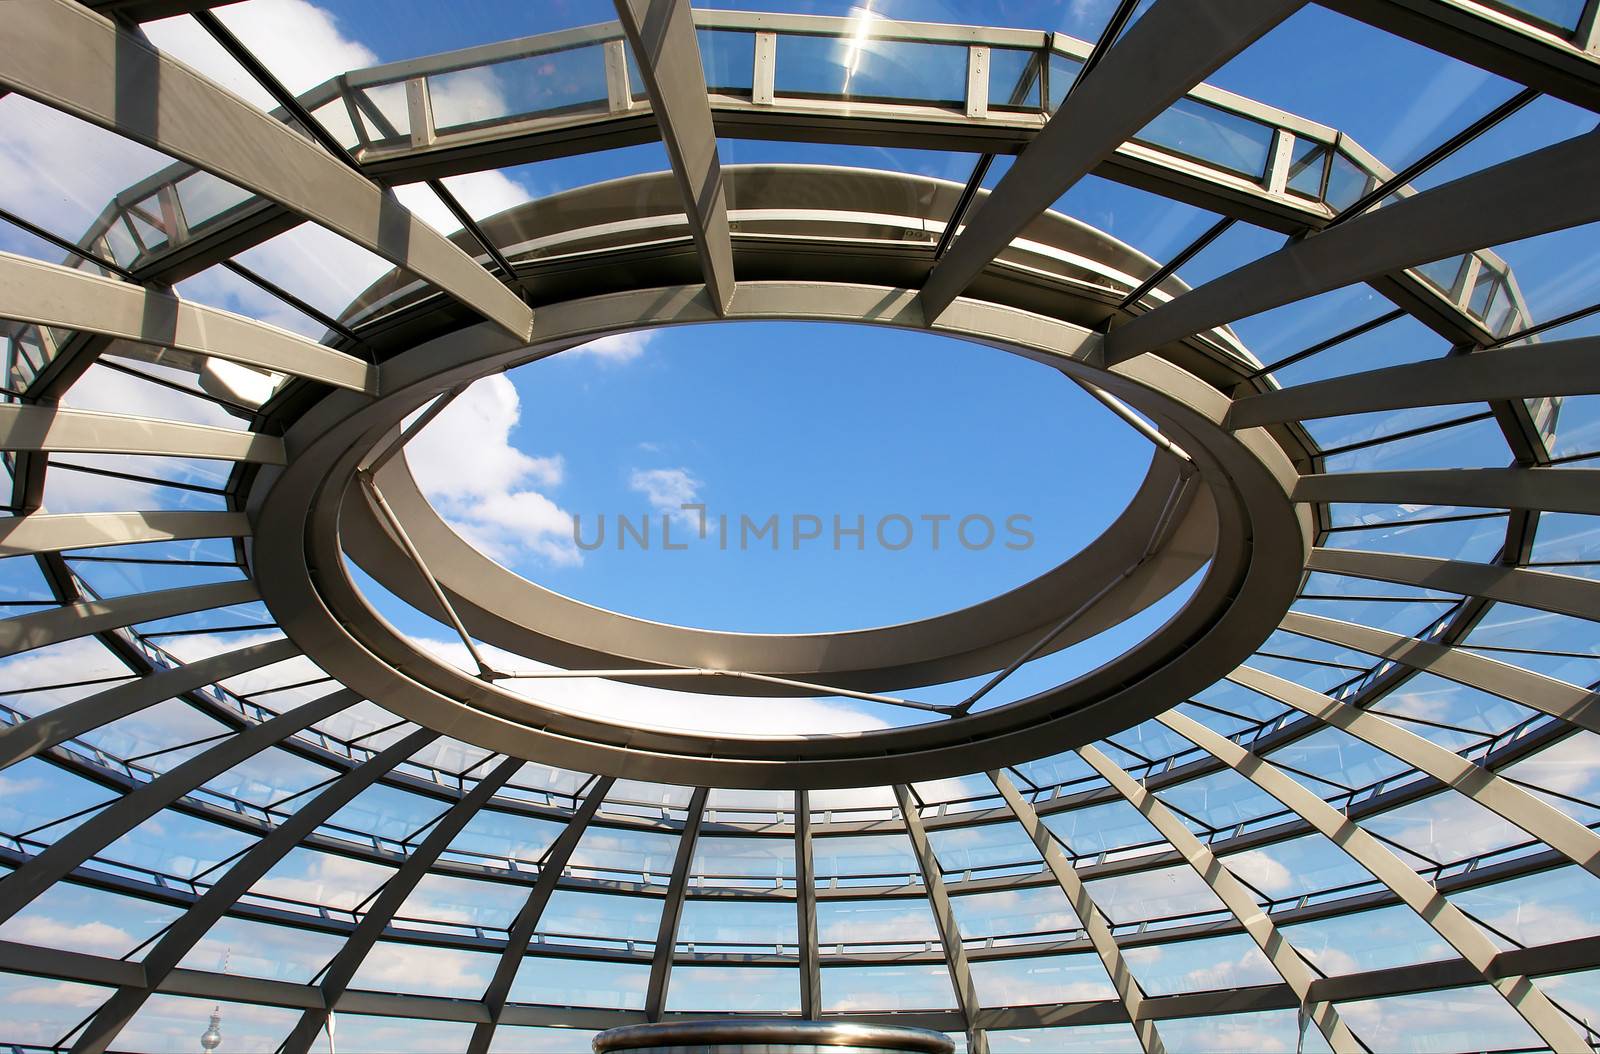 Cupola dome pattern of Reichstag (Germany's parliament building) in Berlin. Design by architect Norman Foster